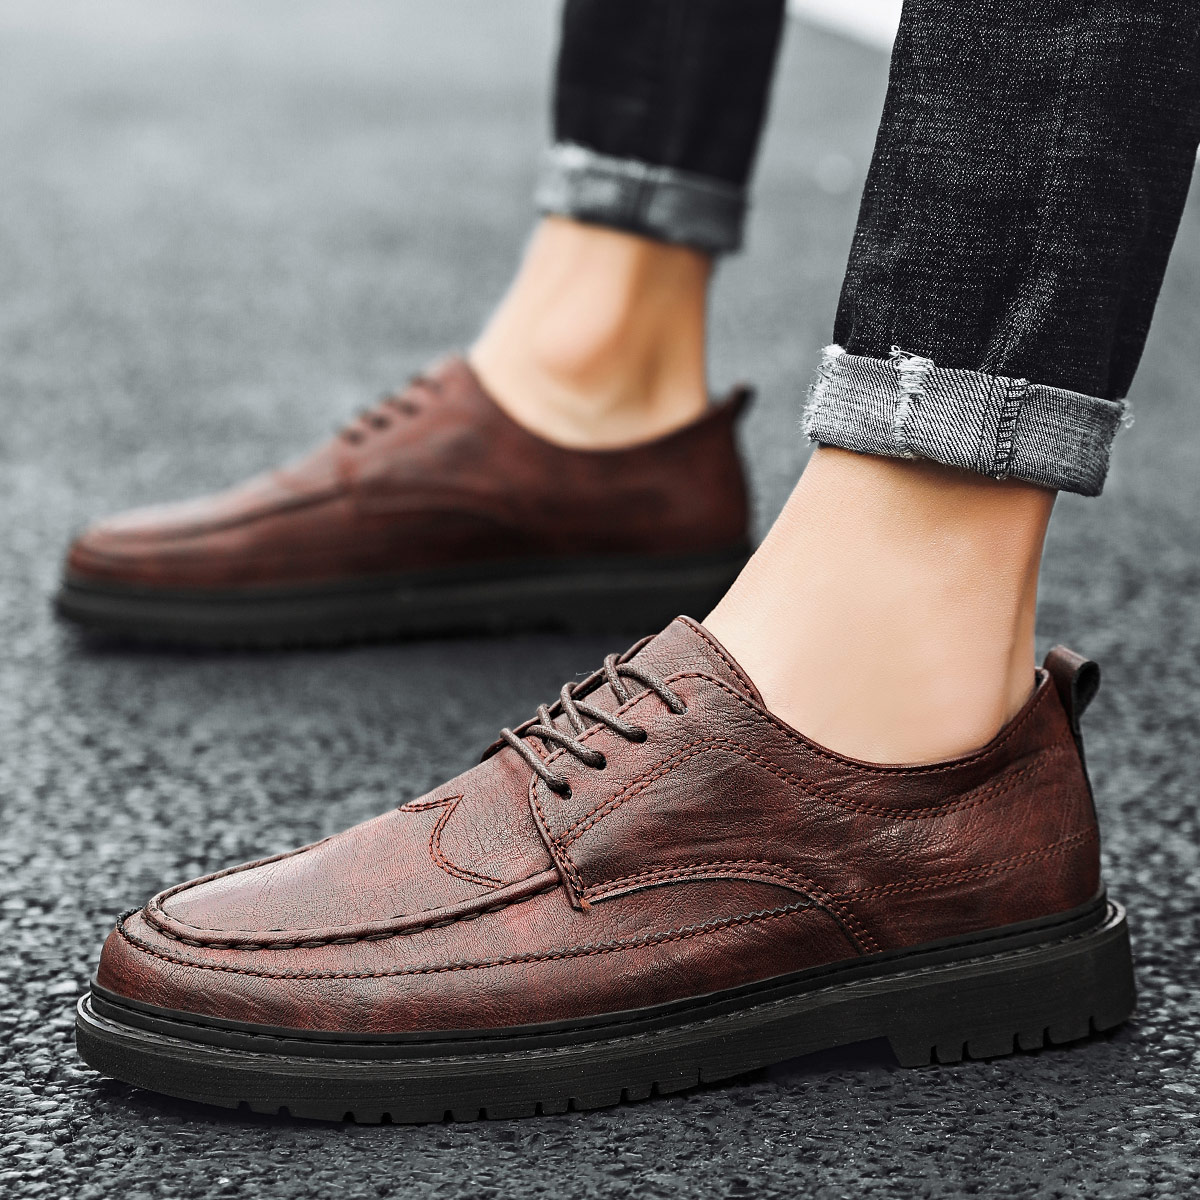 High quality casual leather shoes for men (RN-6602) 1. ITEM NO:...